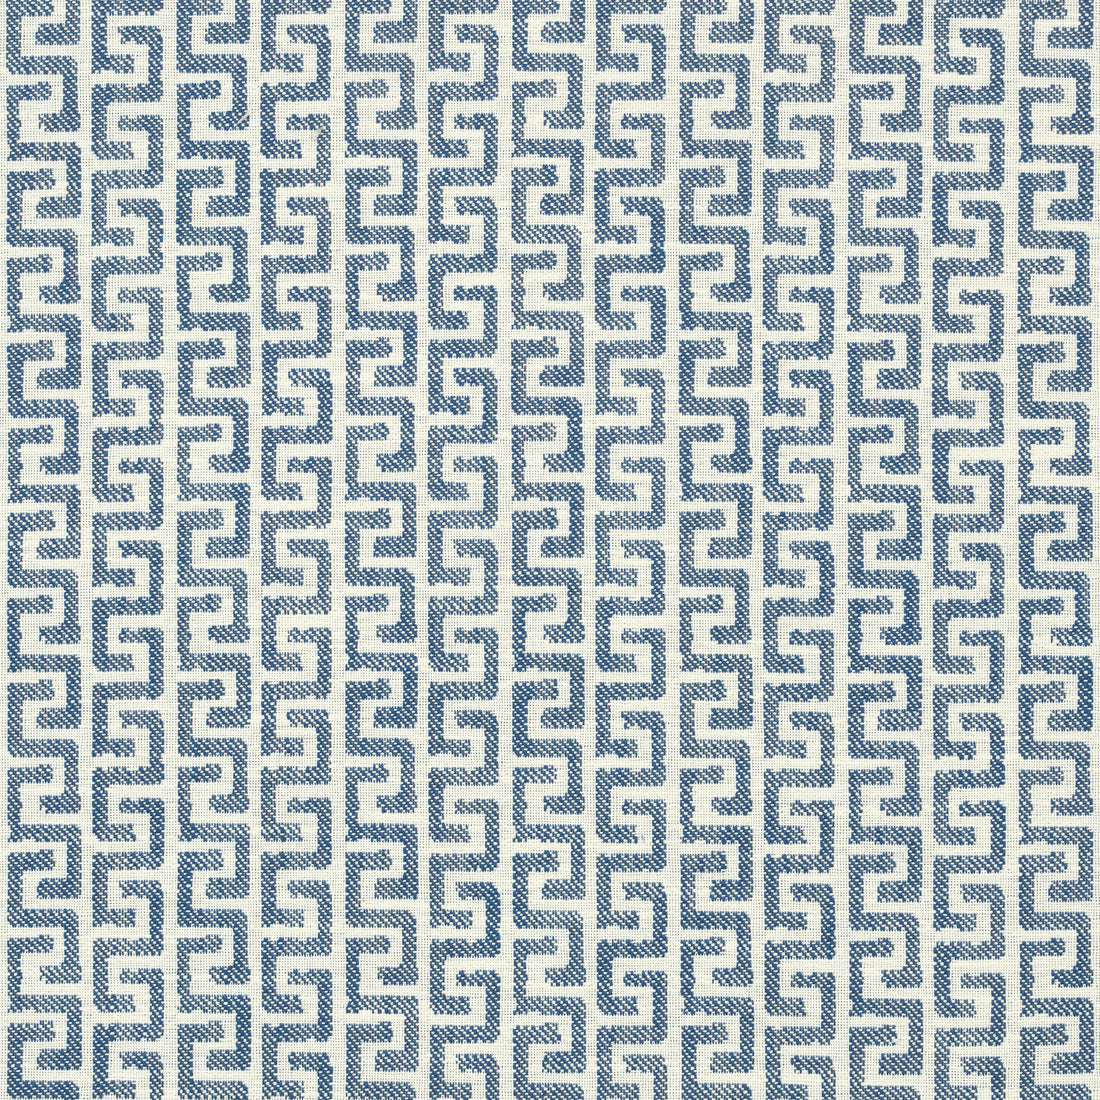 Merritt fabric in indigo color - pattern number W74246 - by Thibaut in the Passage collection